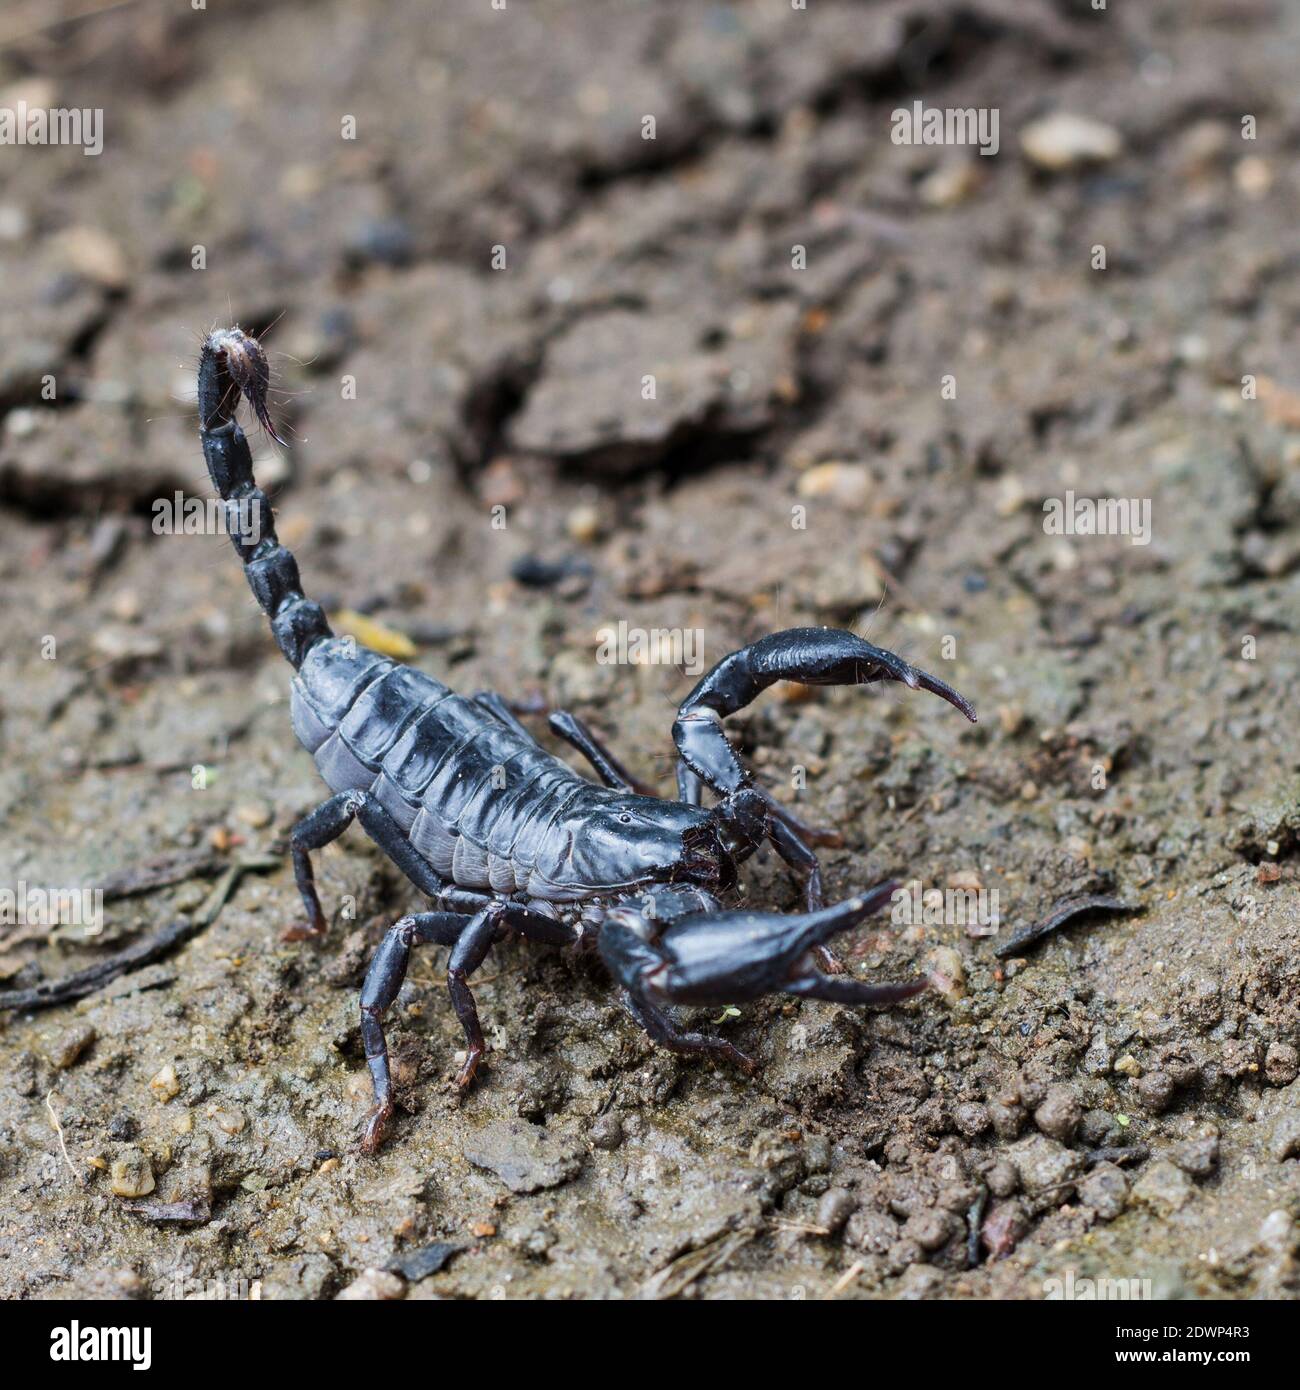 Image of scorpion on the ground. Animals. Insect. Stock Photo